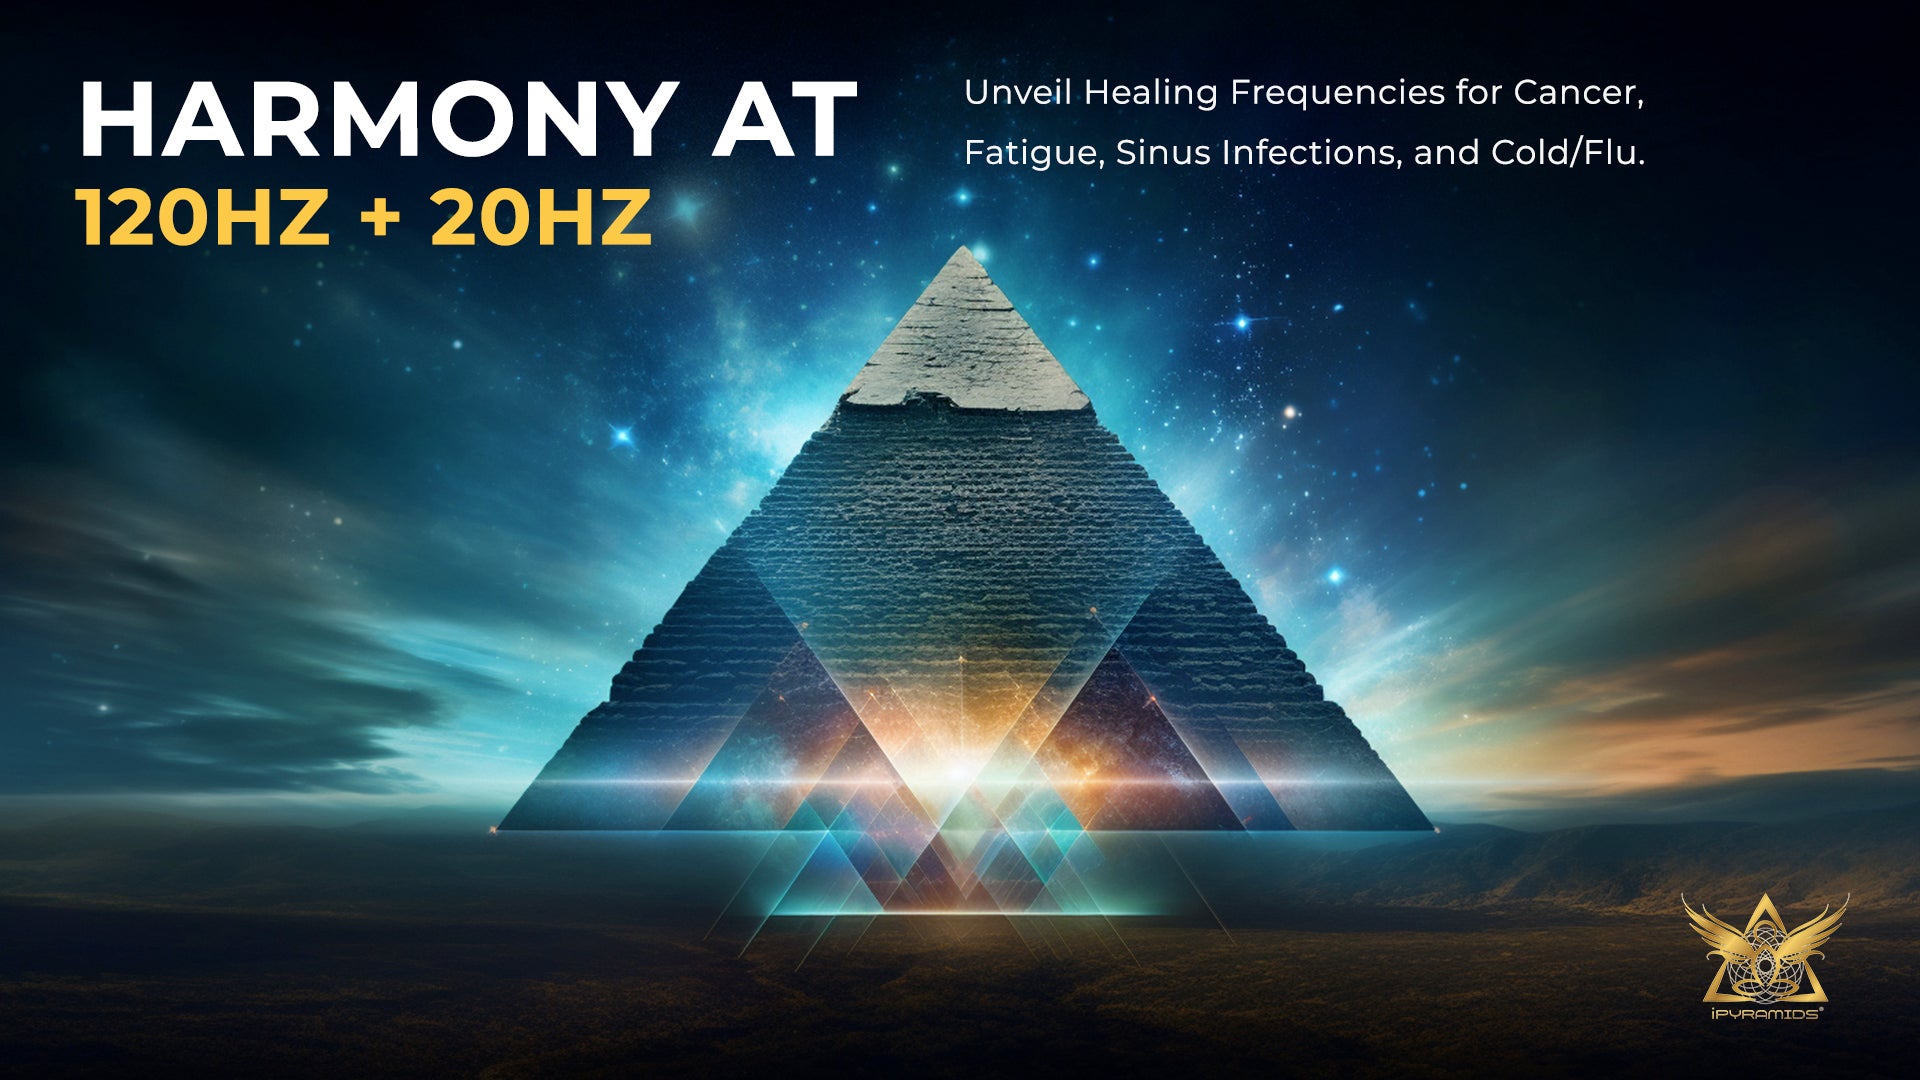 Harmony at 120Hz + 20Hz: Unveil Healing Frequencies for Cancer, Fatigue, Sinus Infections, and Cold/Flu